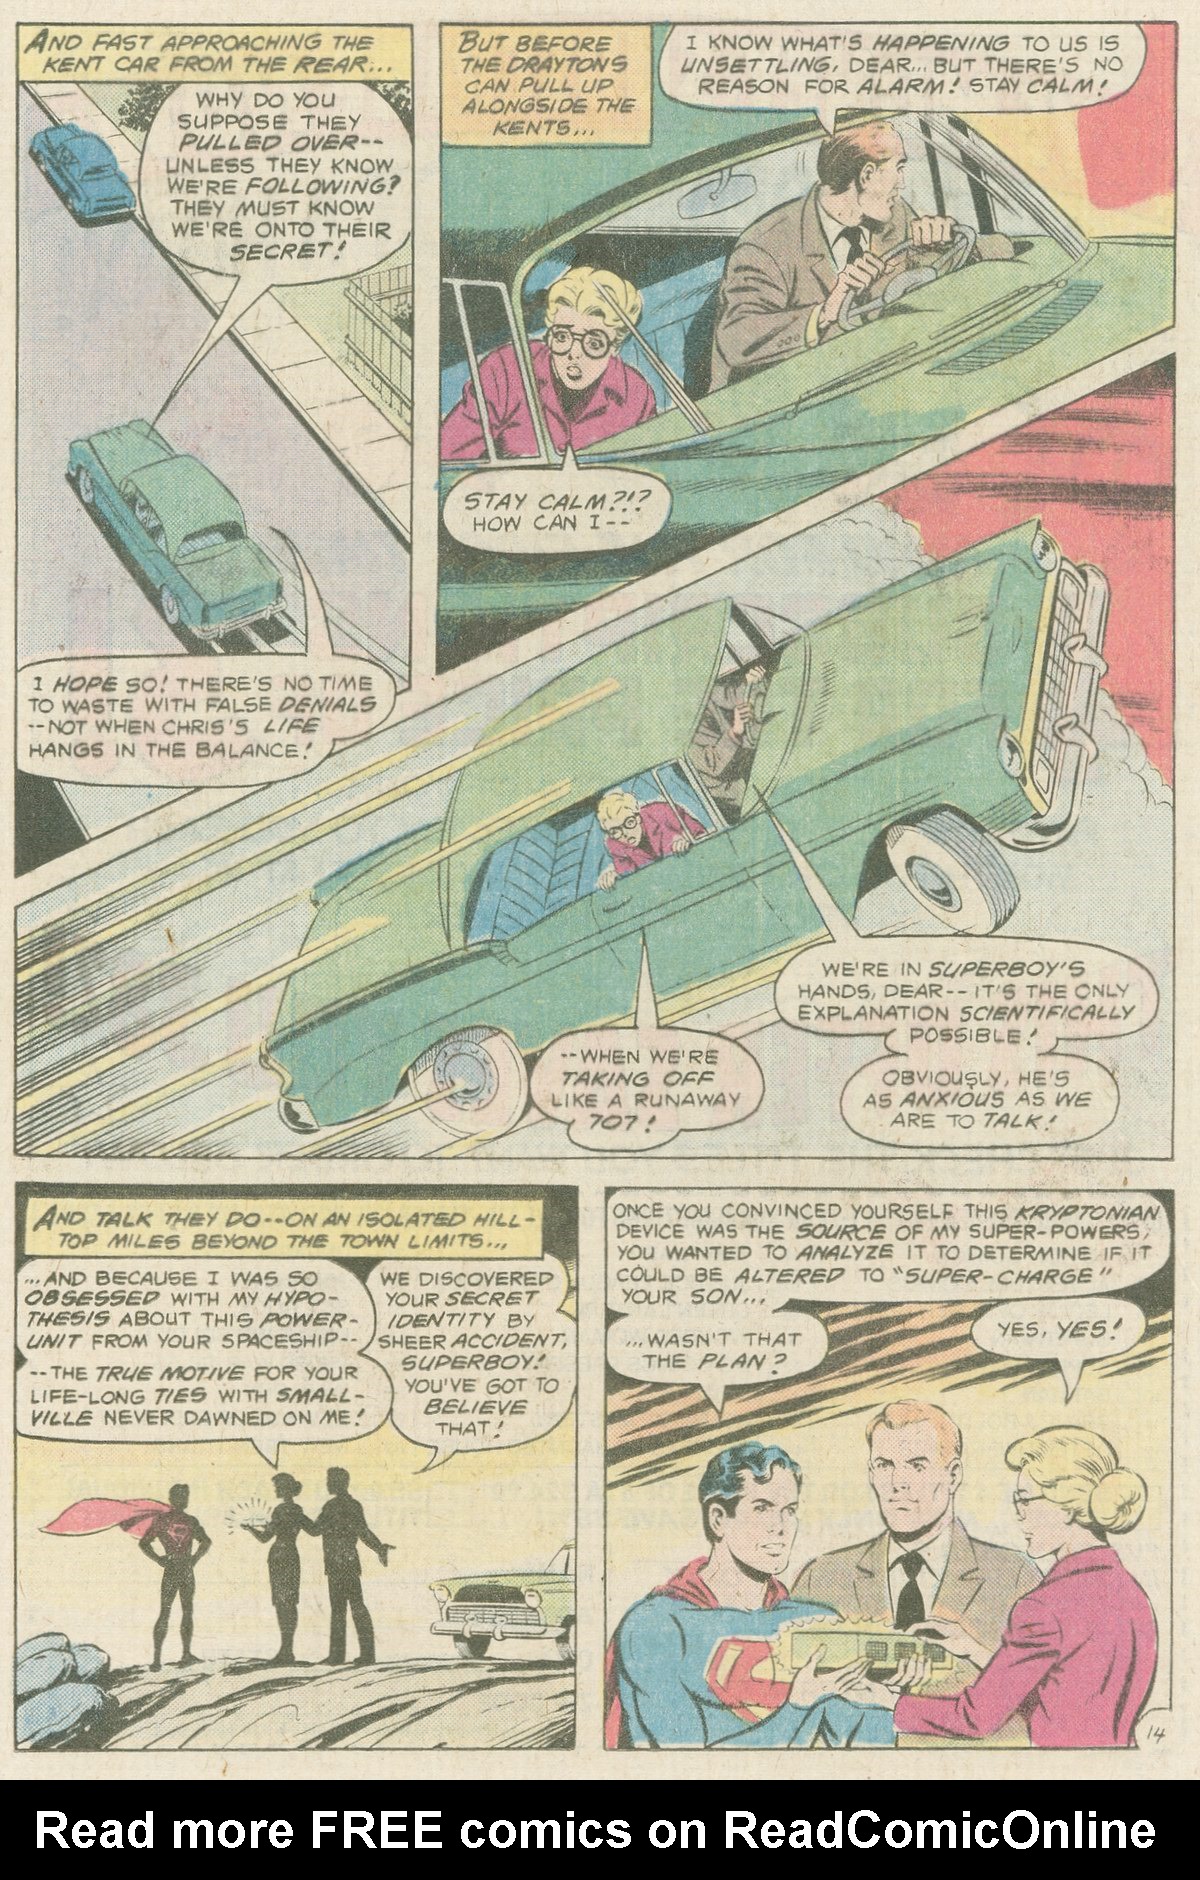 The New Adventures of Superboy 16 Page 14